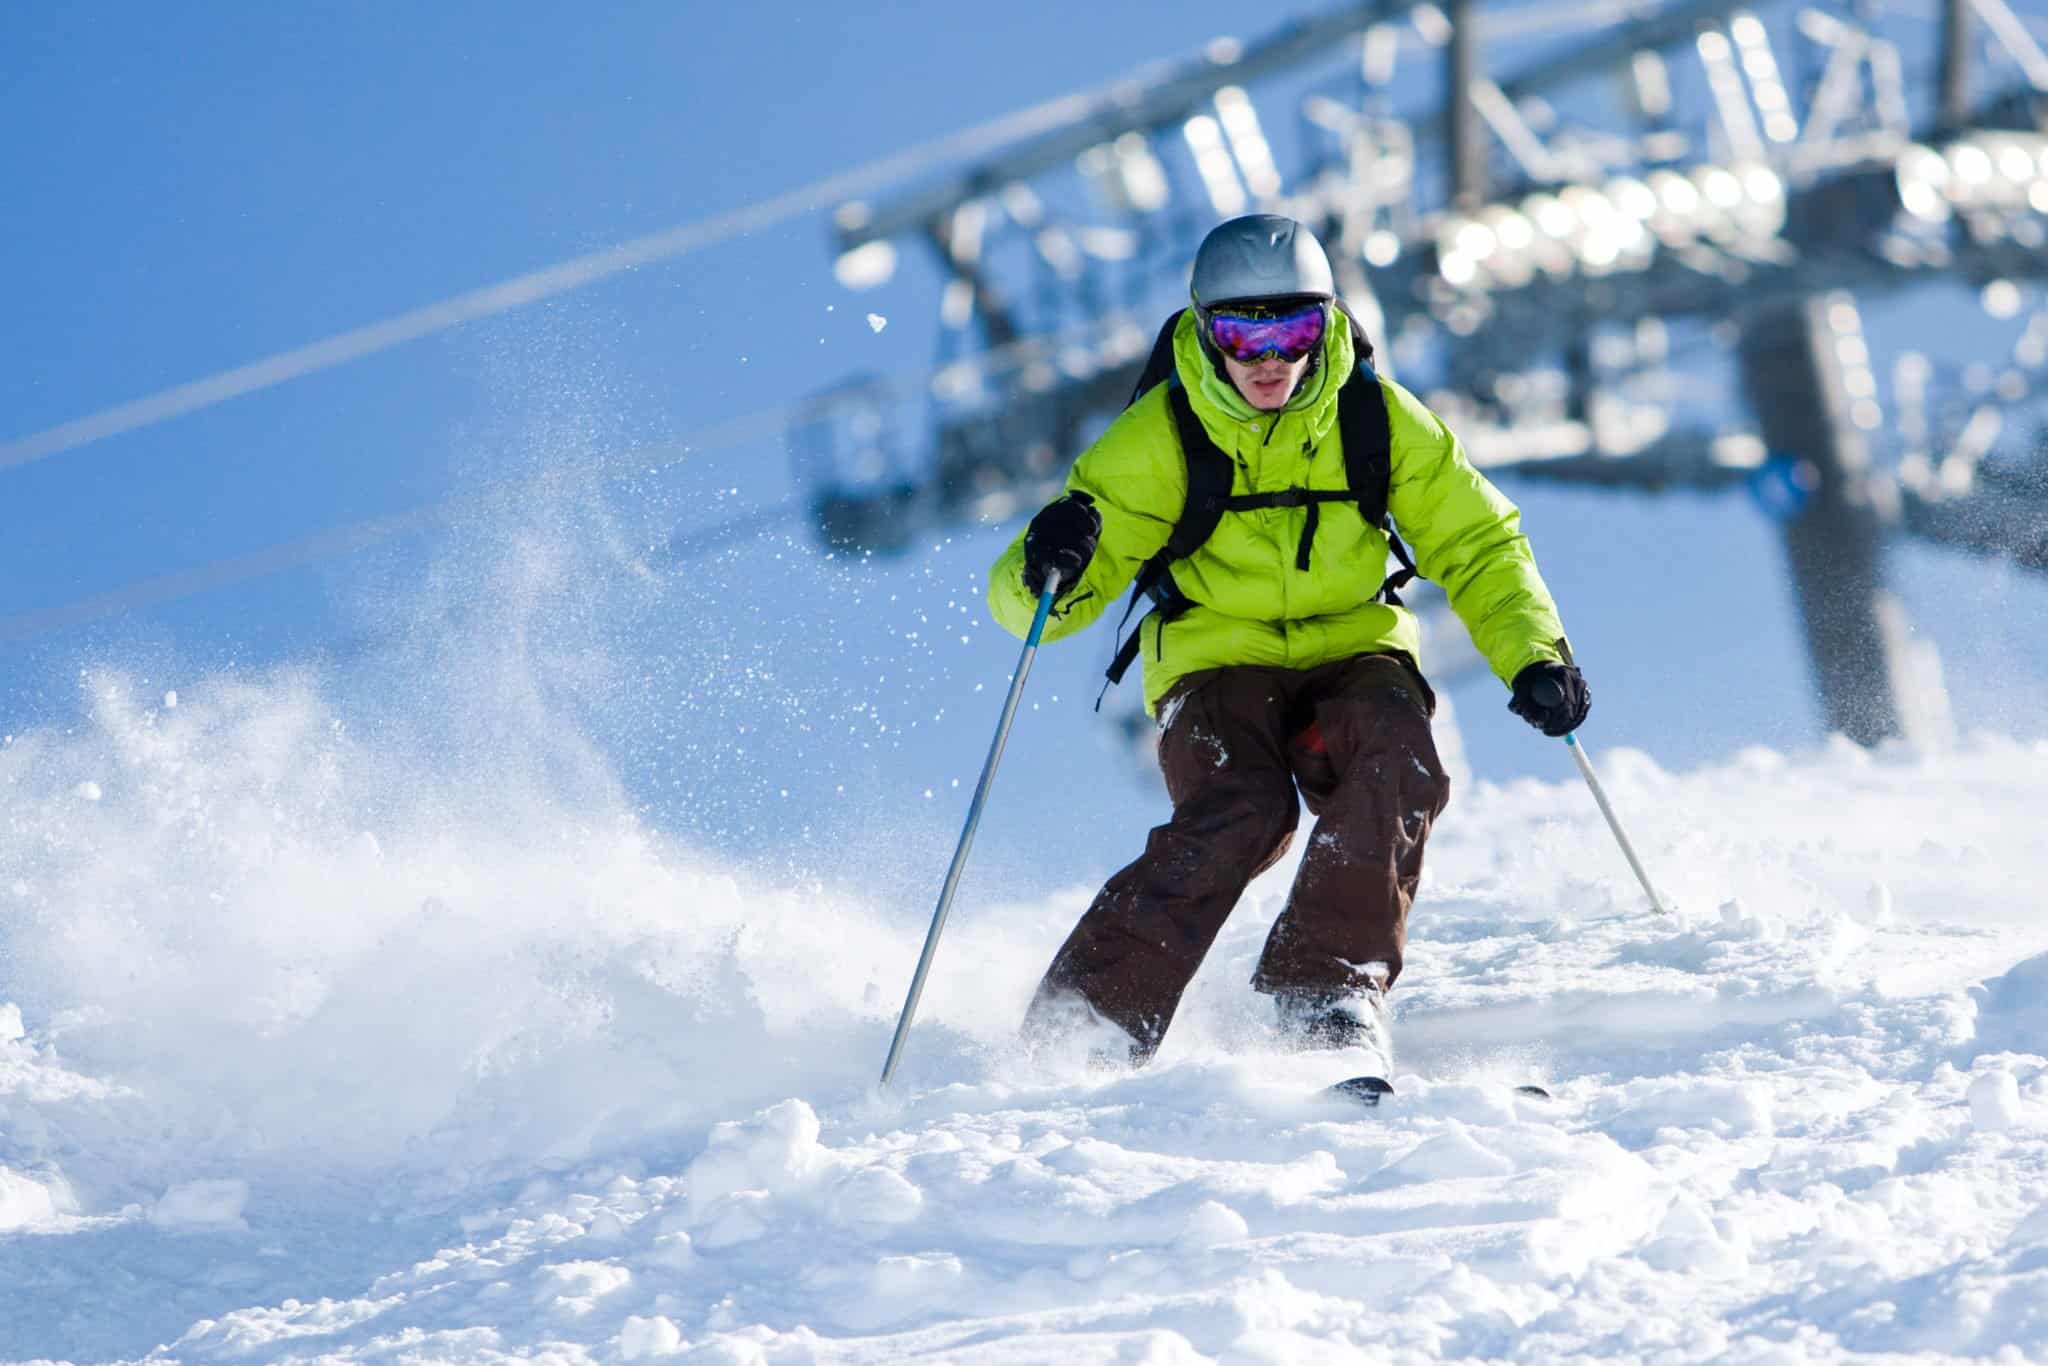 Skiing: Hitting the Slopes Without Injuries